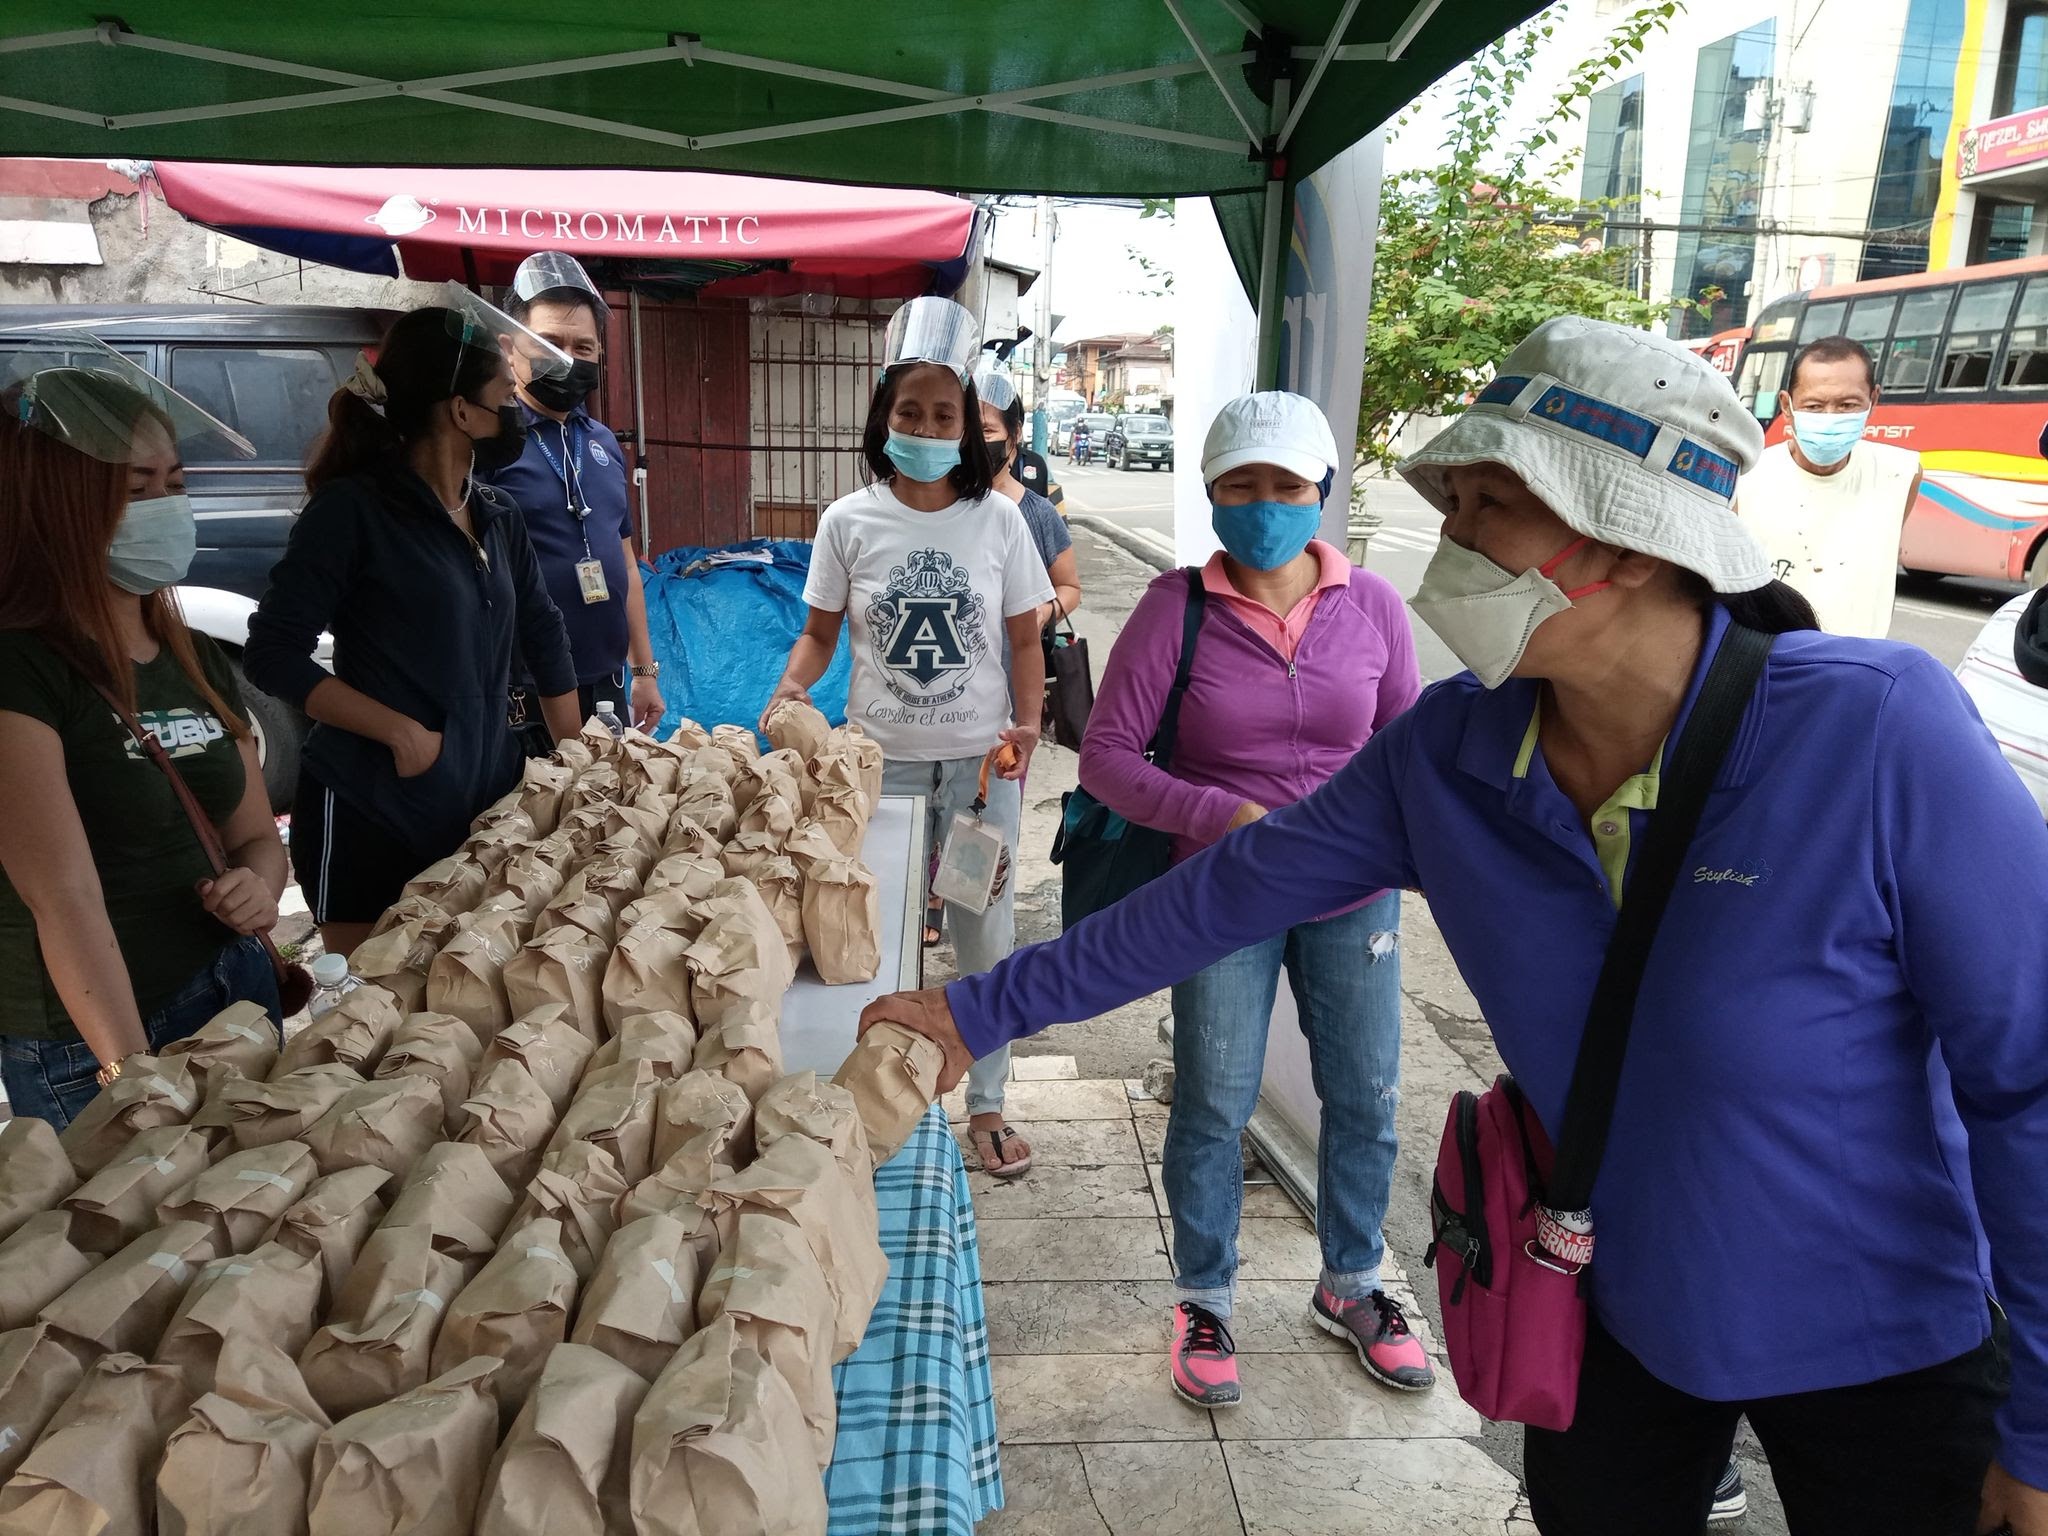 Aboitiz supports community pantries, provides livelihood to local bakers